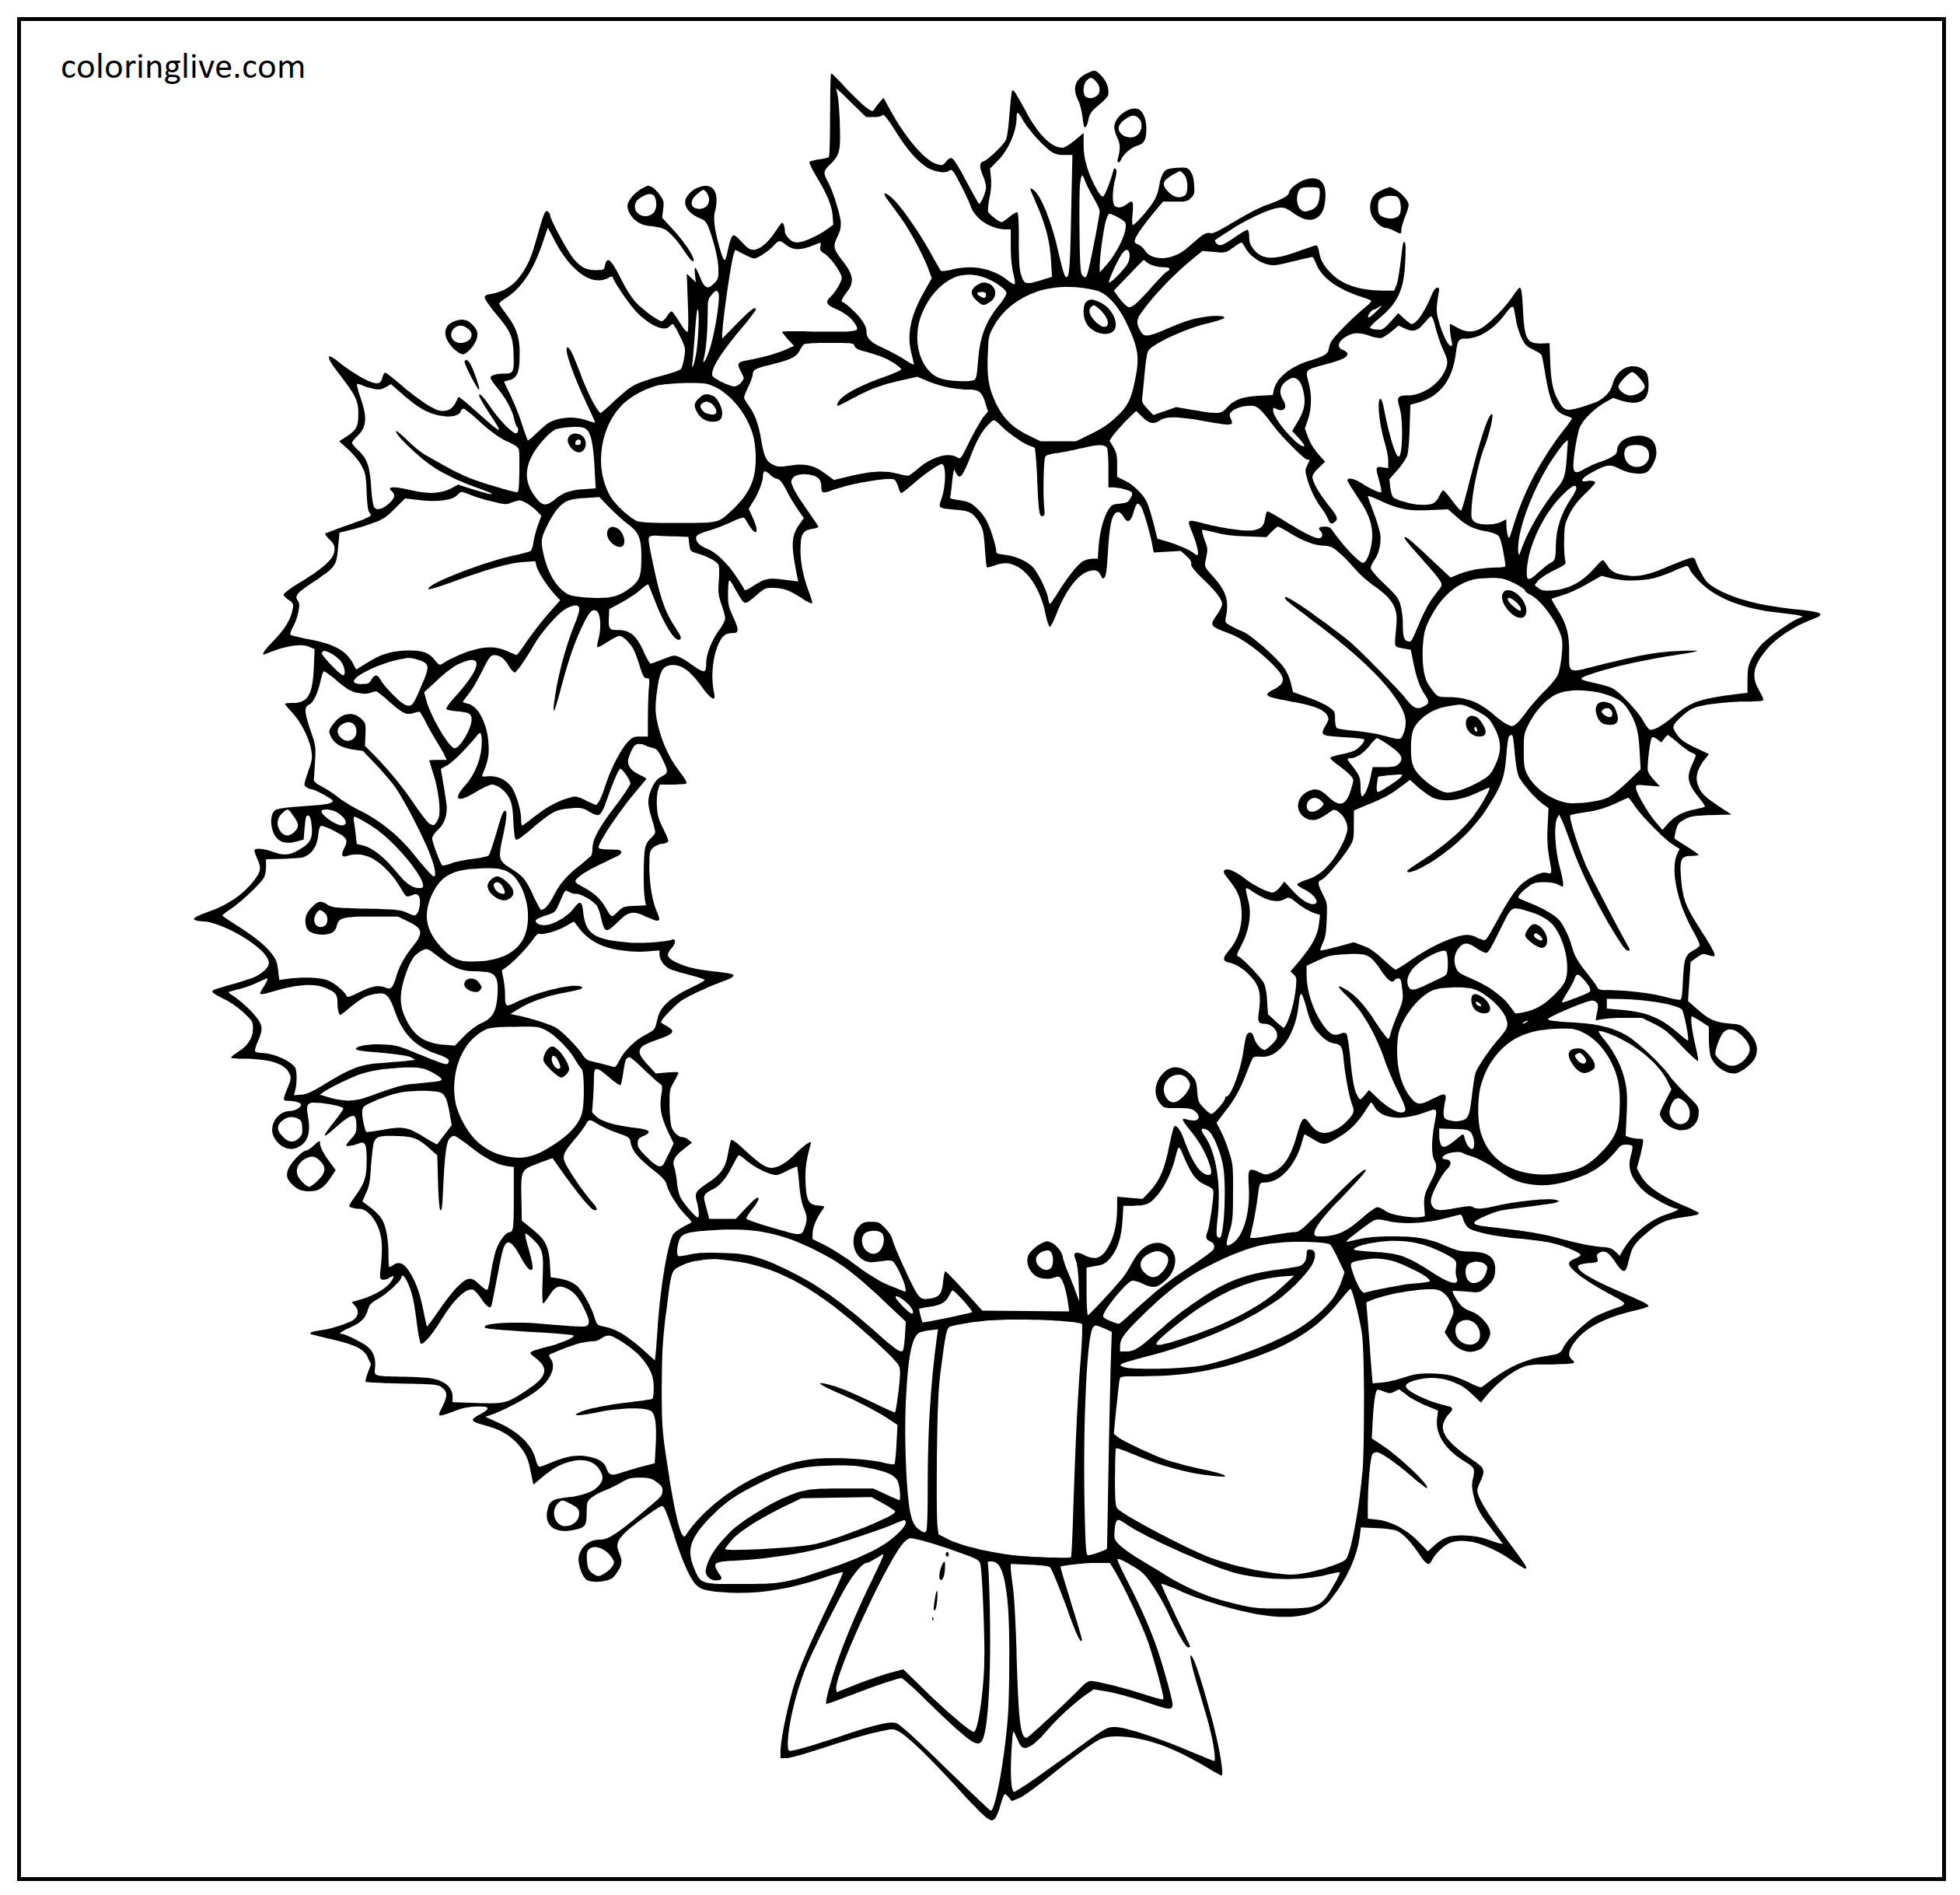 Printable Beautiful Christmas Wreath with a Bowknot Coloring Page for kids.